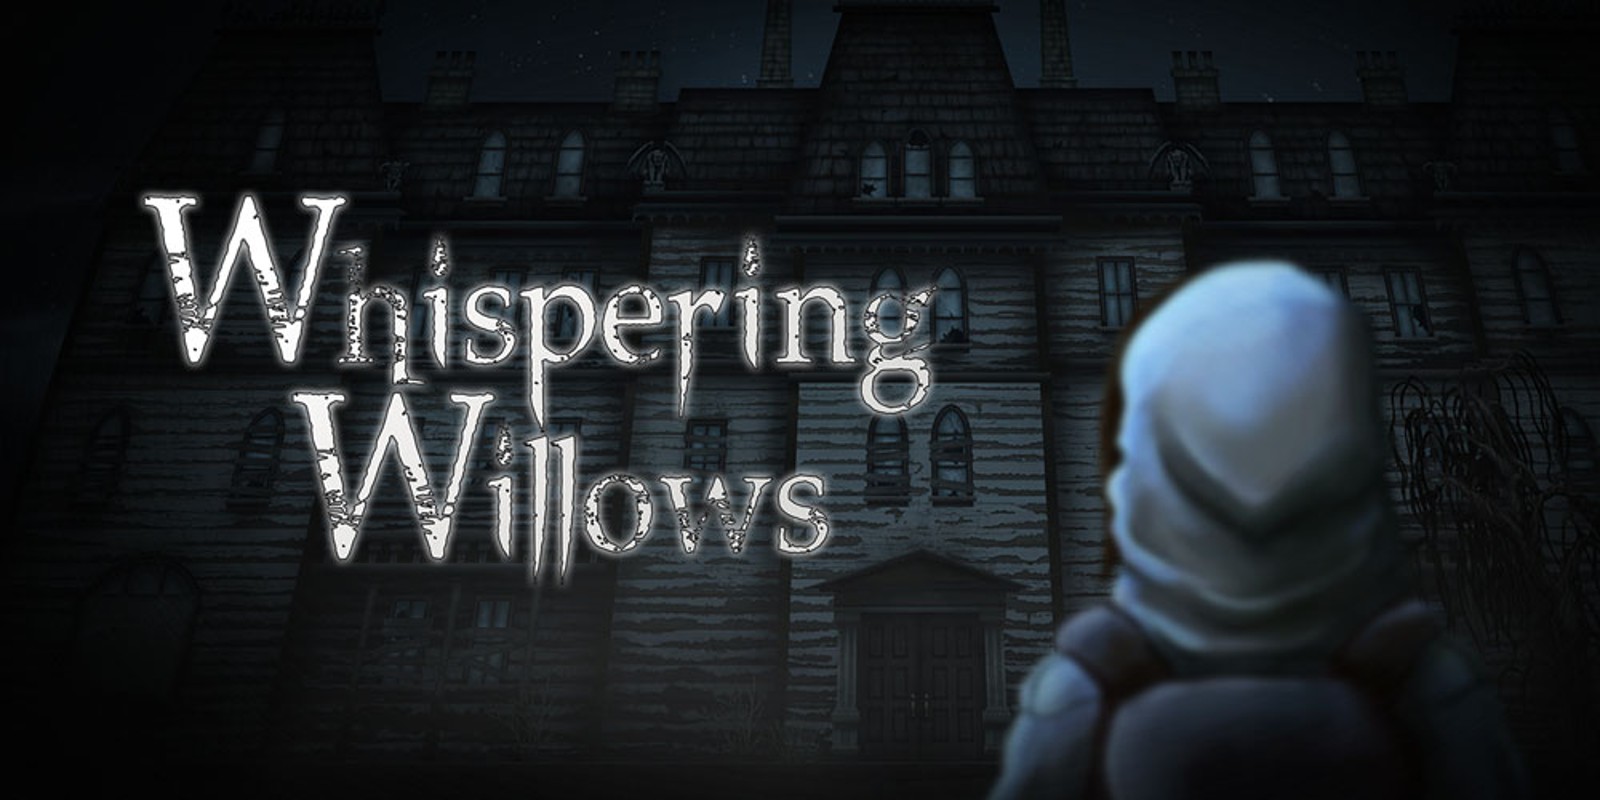 for android download Whispering Willows